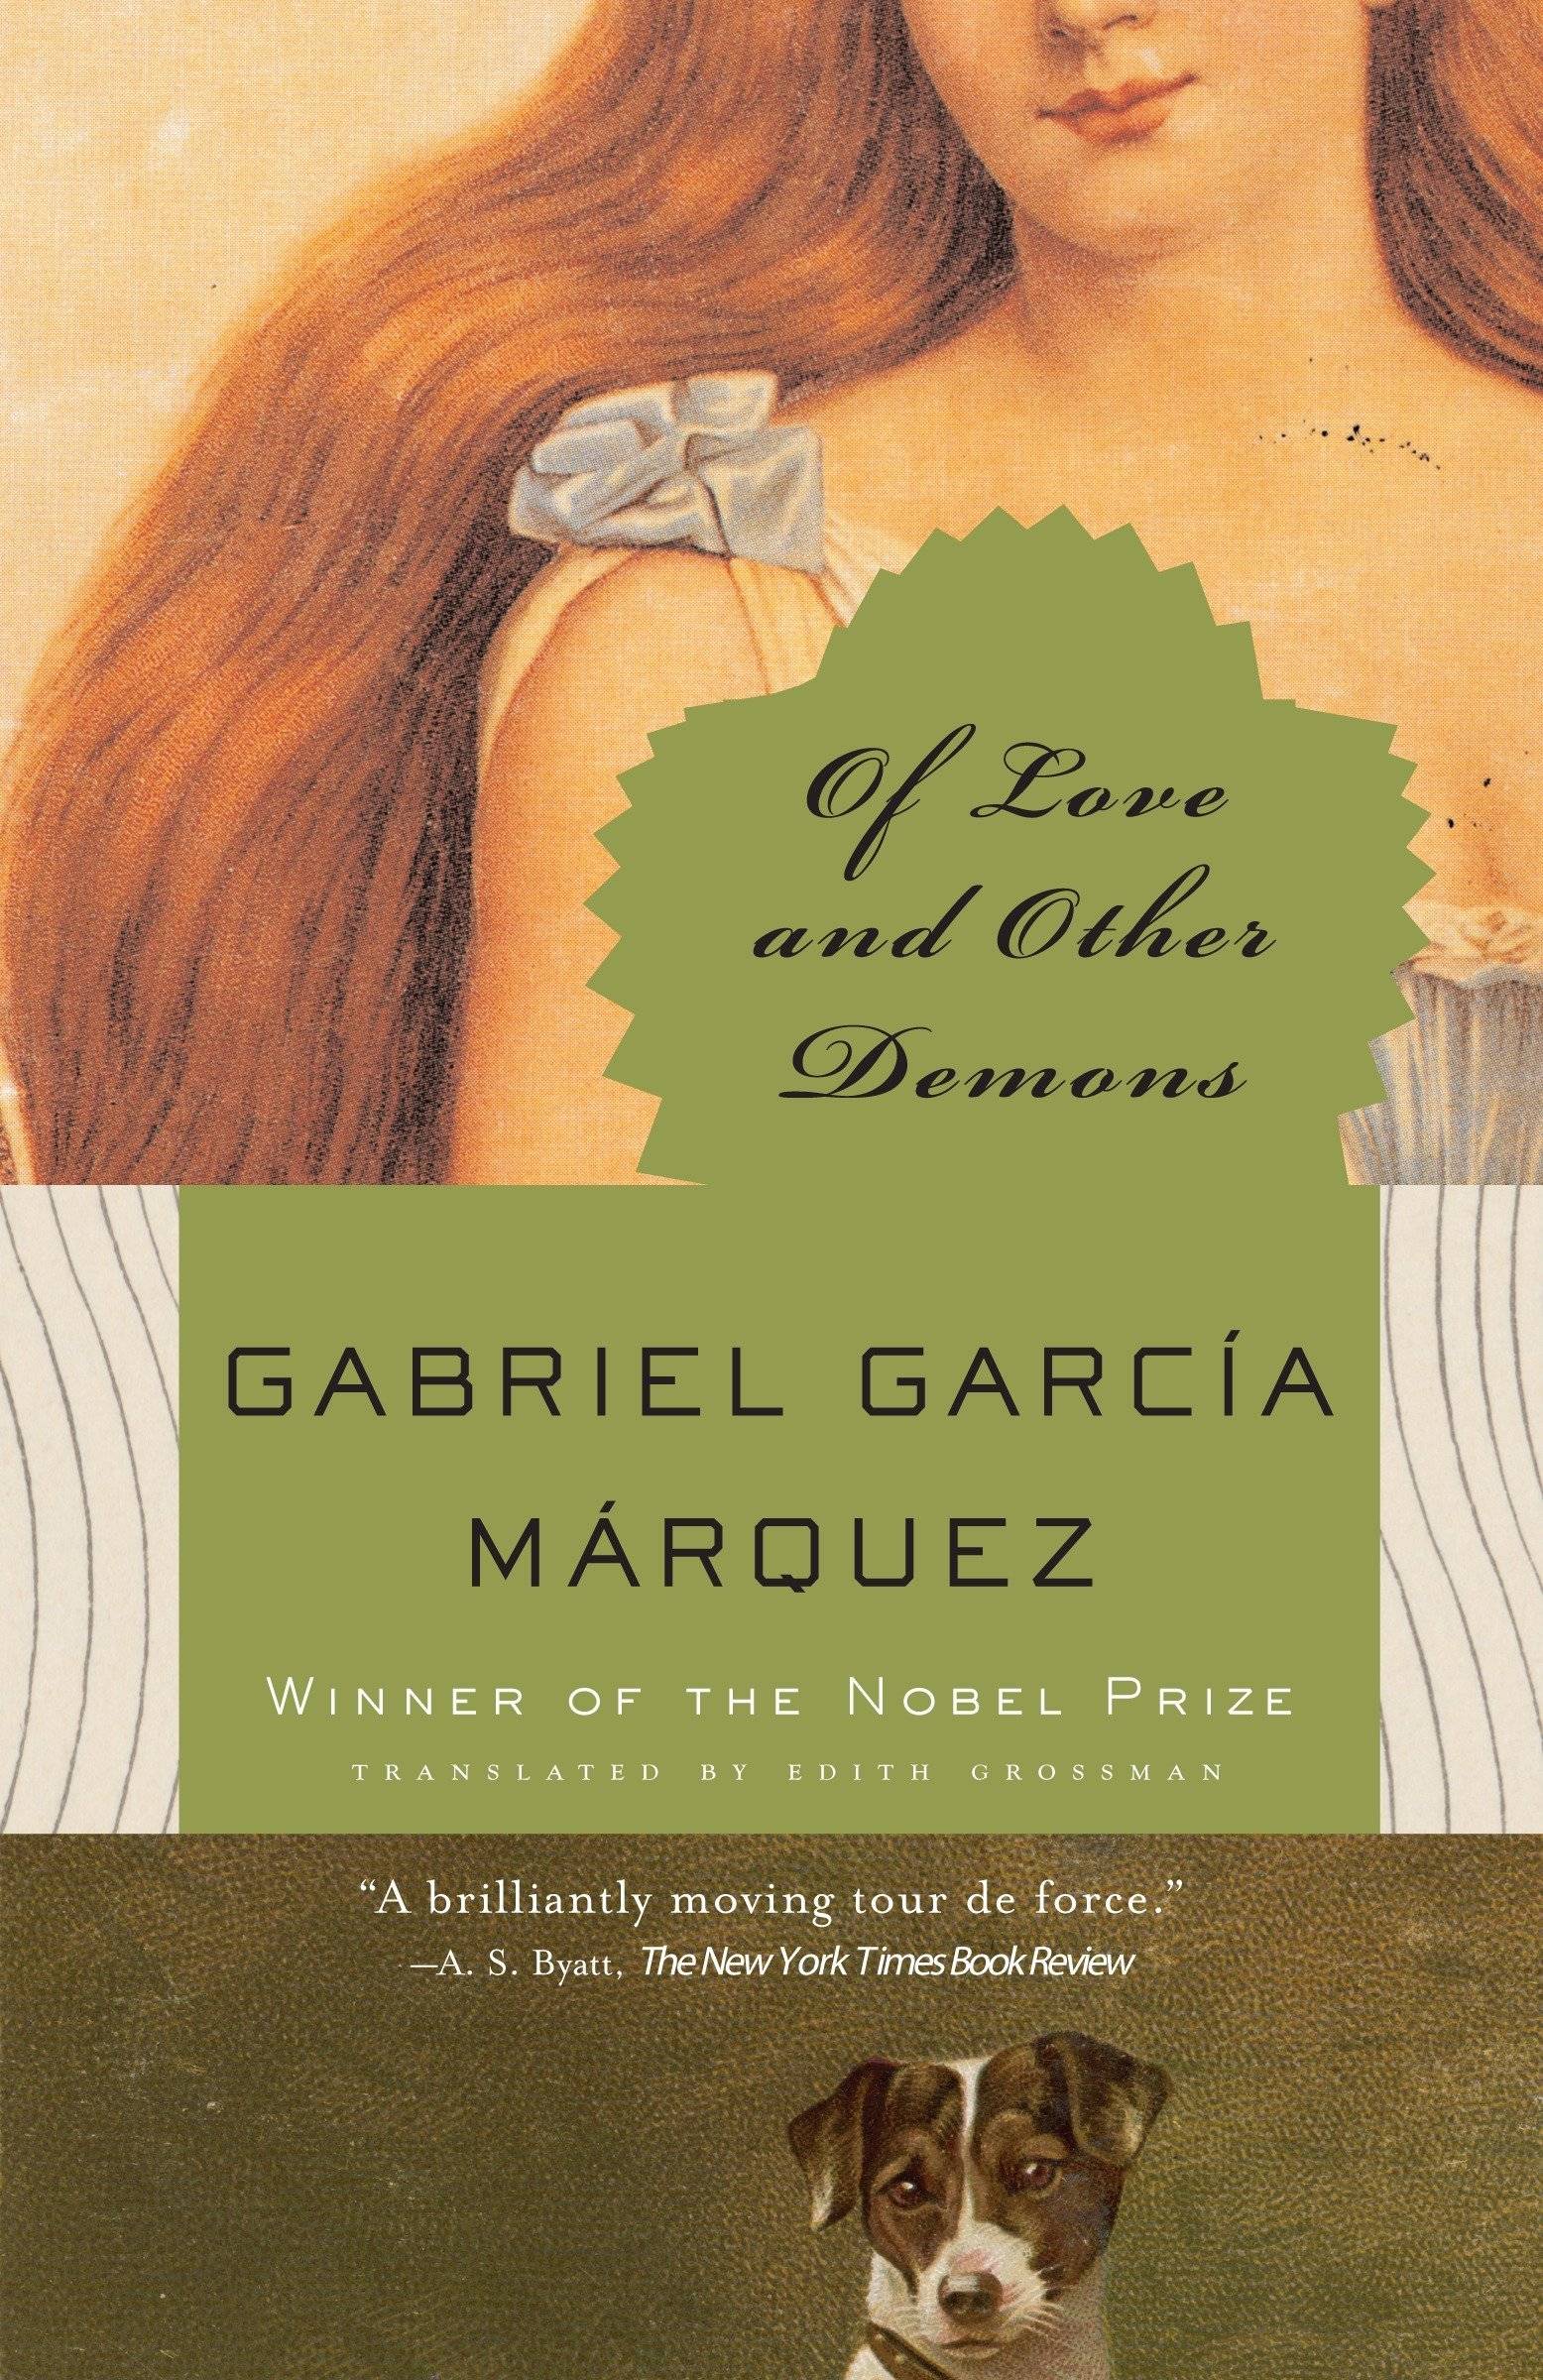 "of love and other demons" cover featuring a illustration of a dog at the bottom and a person with long golden hair at the top.